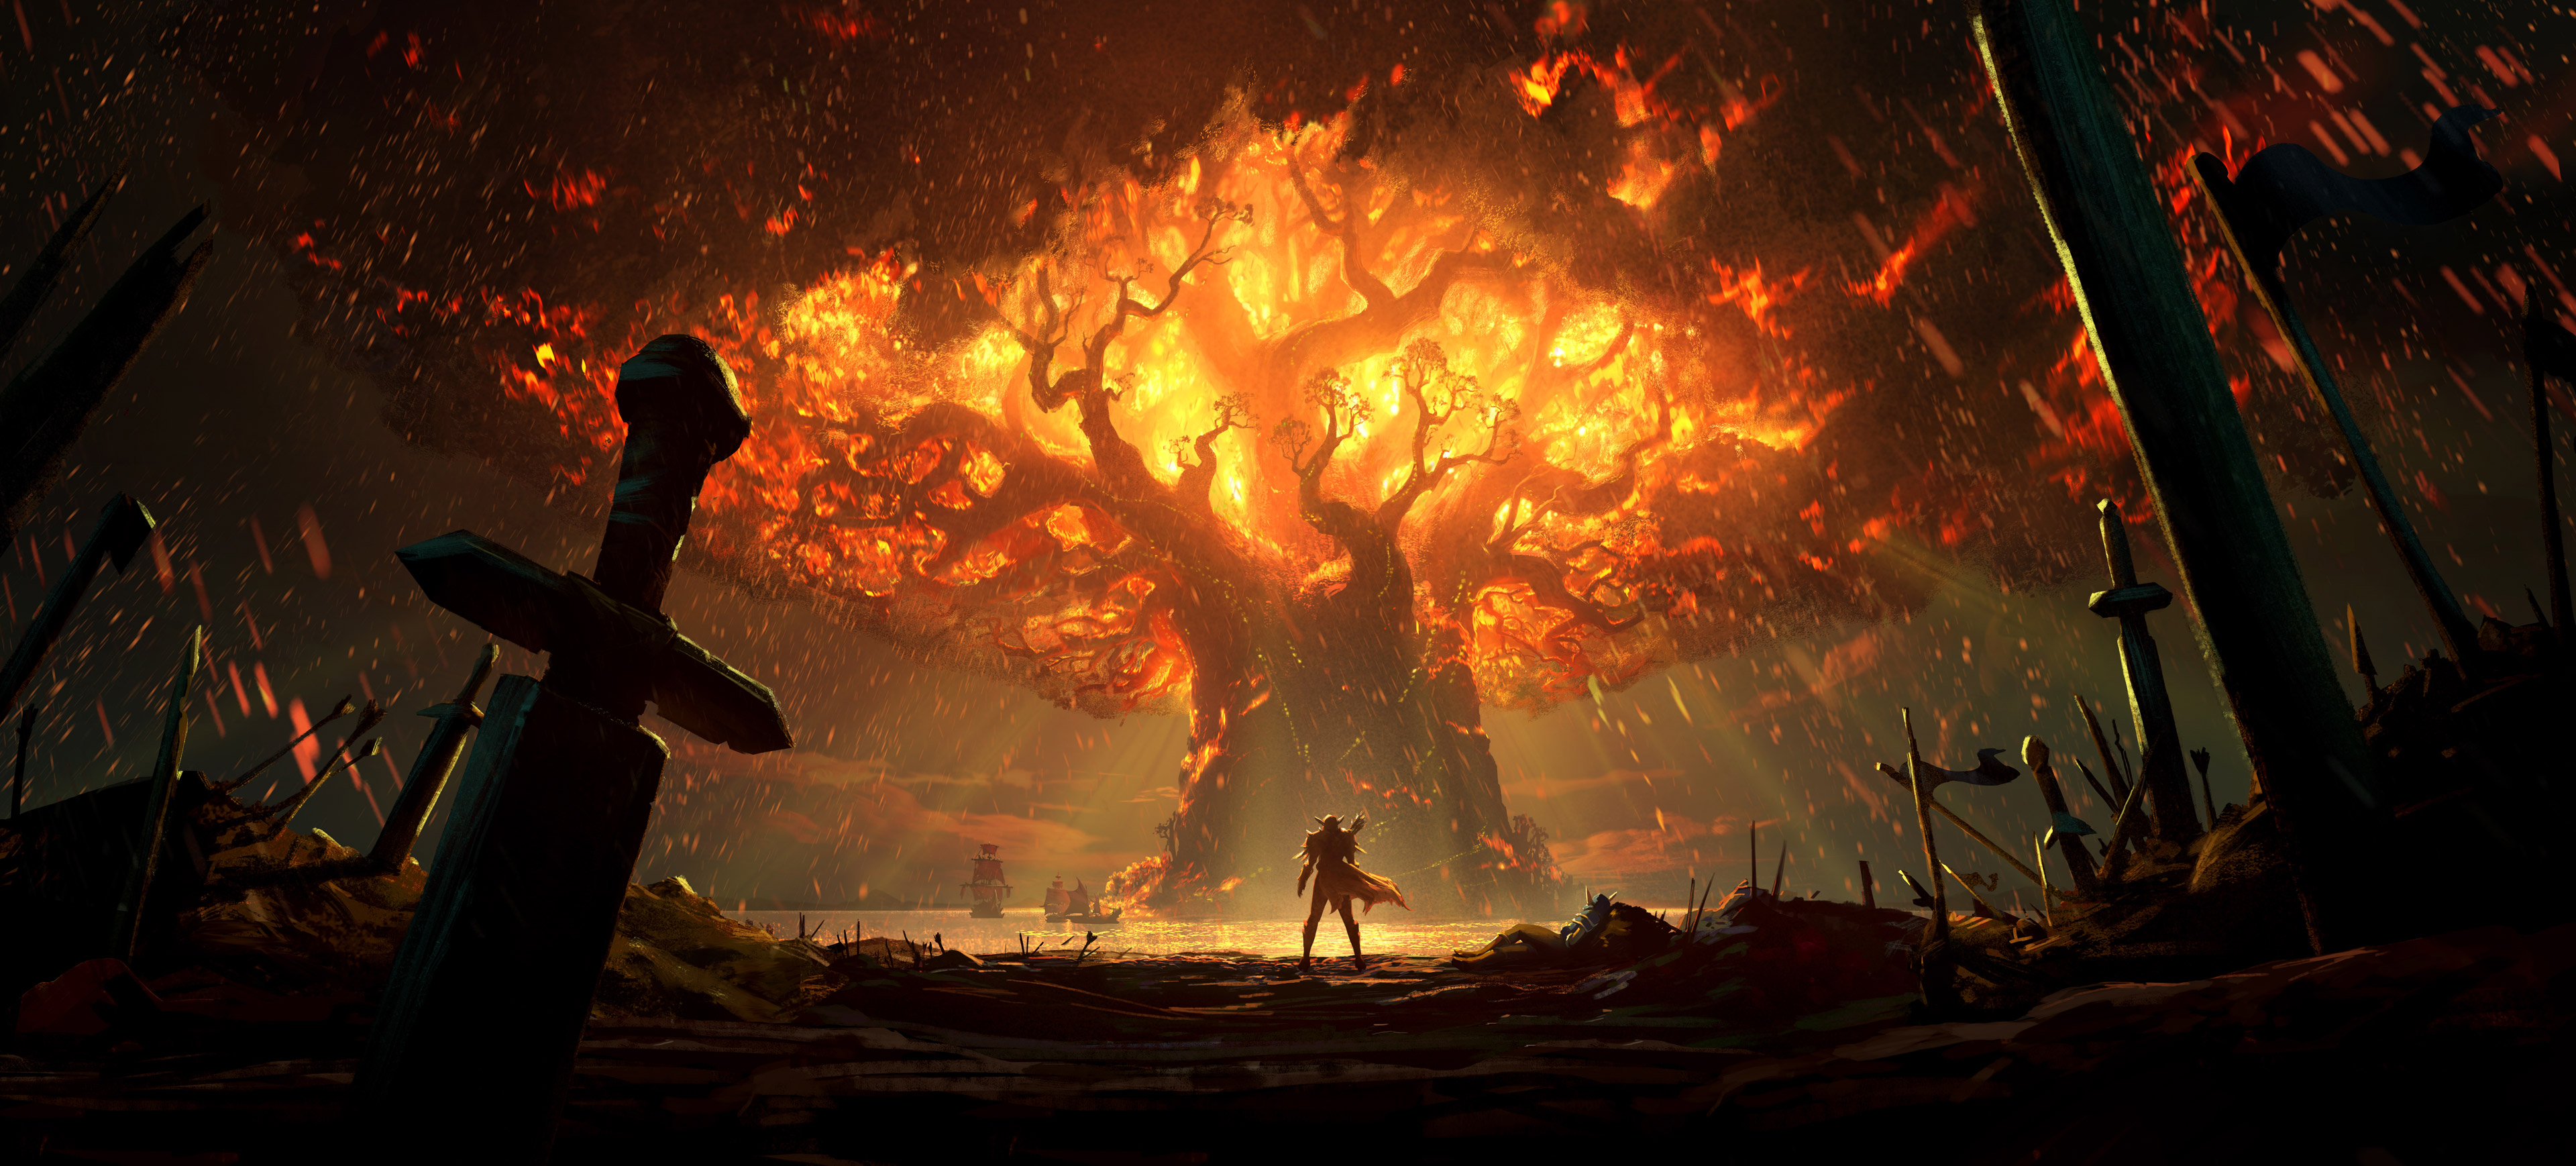 World of Warcraft: Battle for Azeroth - the Burning of Teldrassil